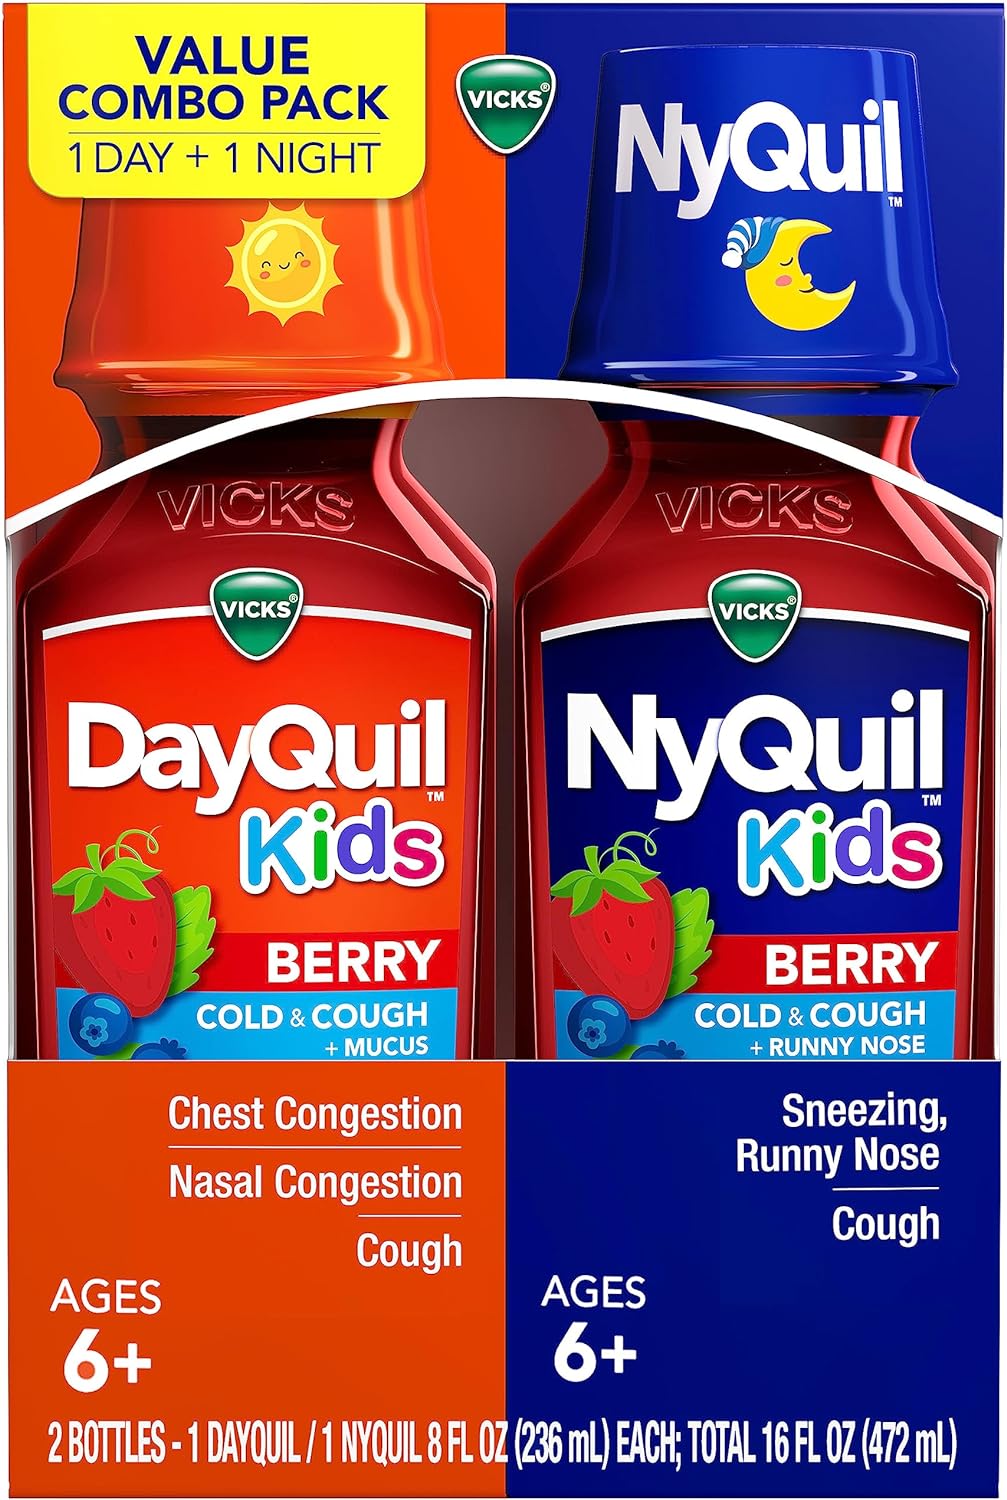 Vicks DayQuil & NyQuil Kids Berry Cold & Cough Medicine Combo Pack, Daytime & Nighttime Relief